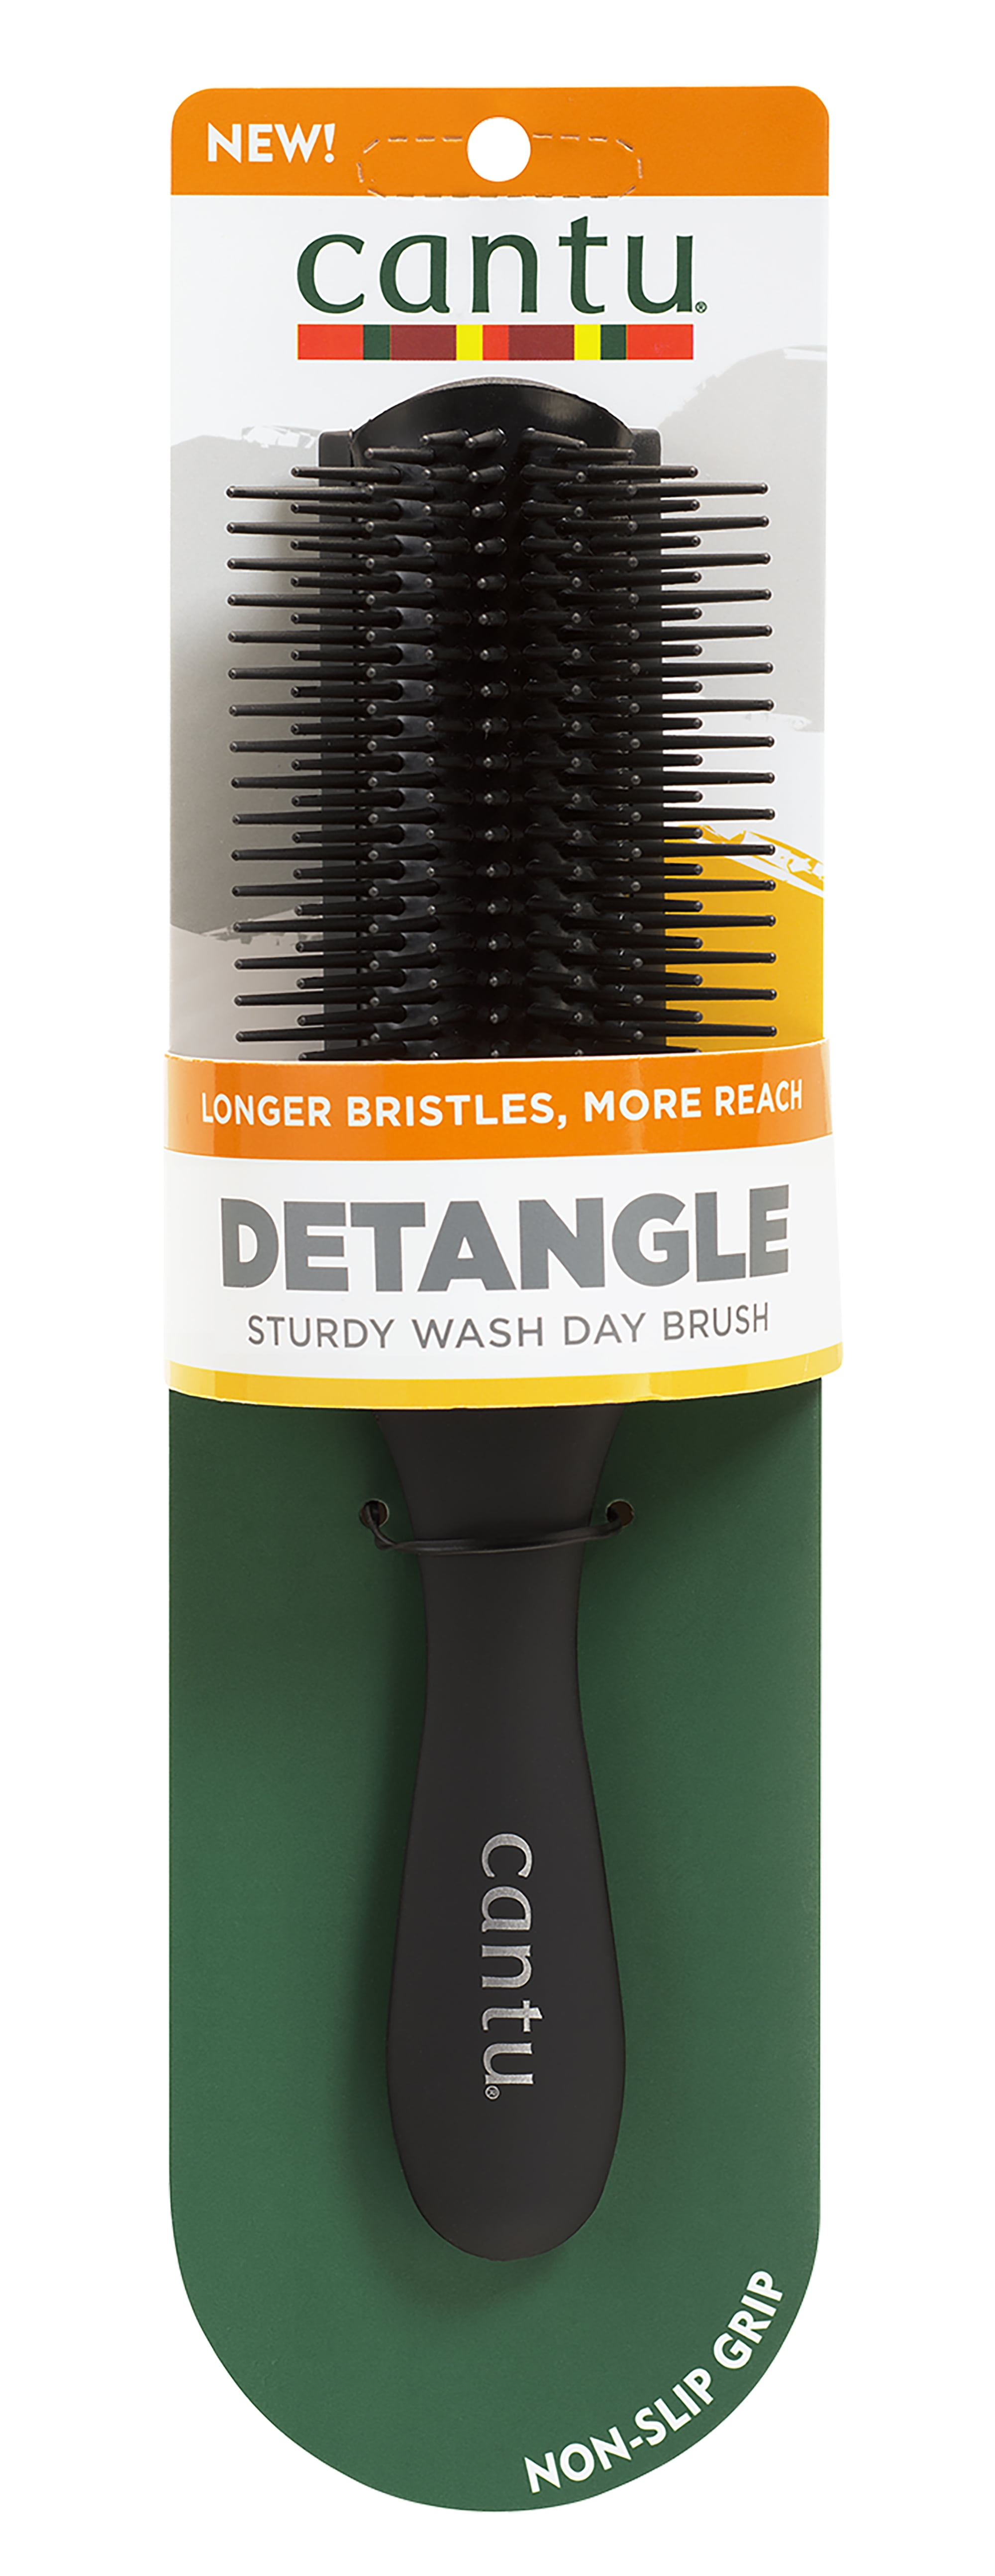 Cantu Detangle Wash Day Hair Brush, Perfect for Thick & Curly Hair